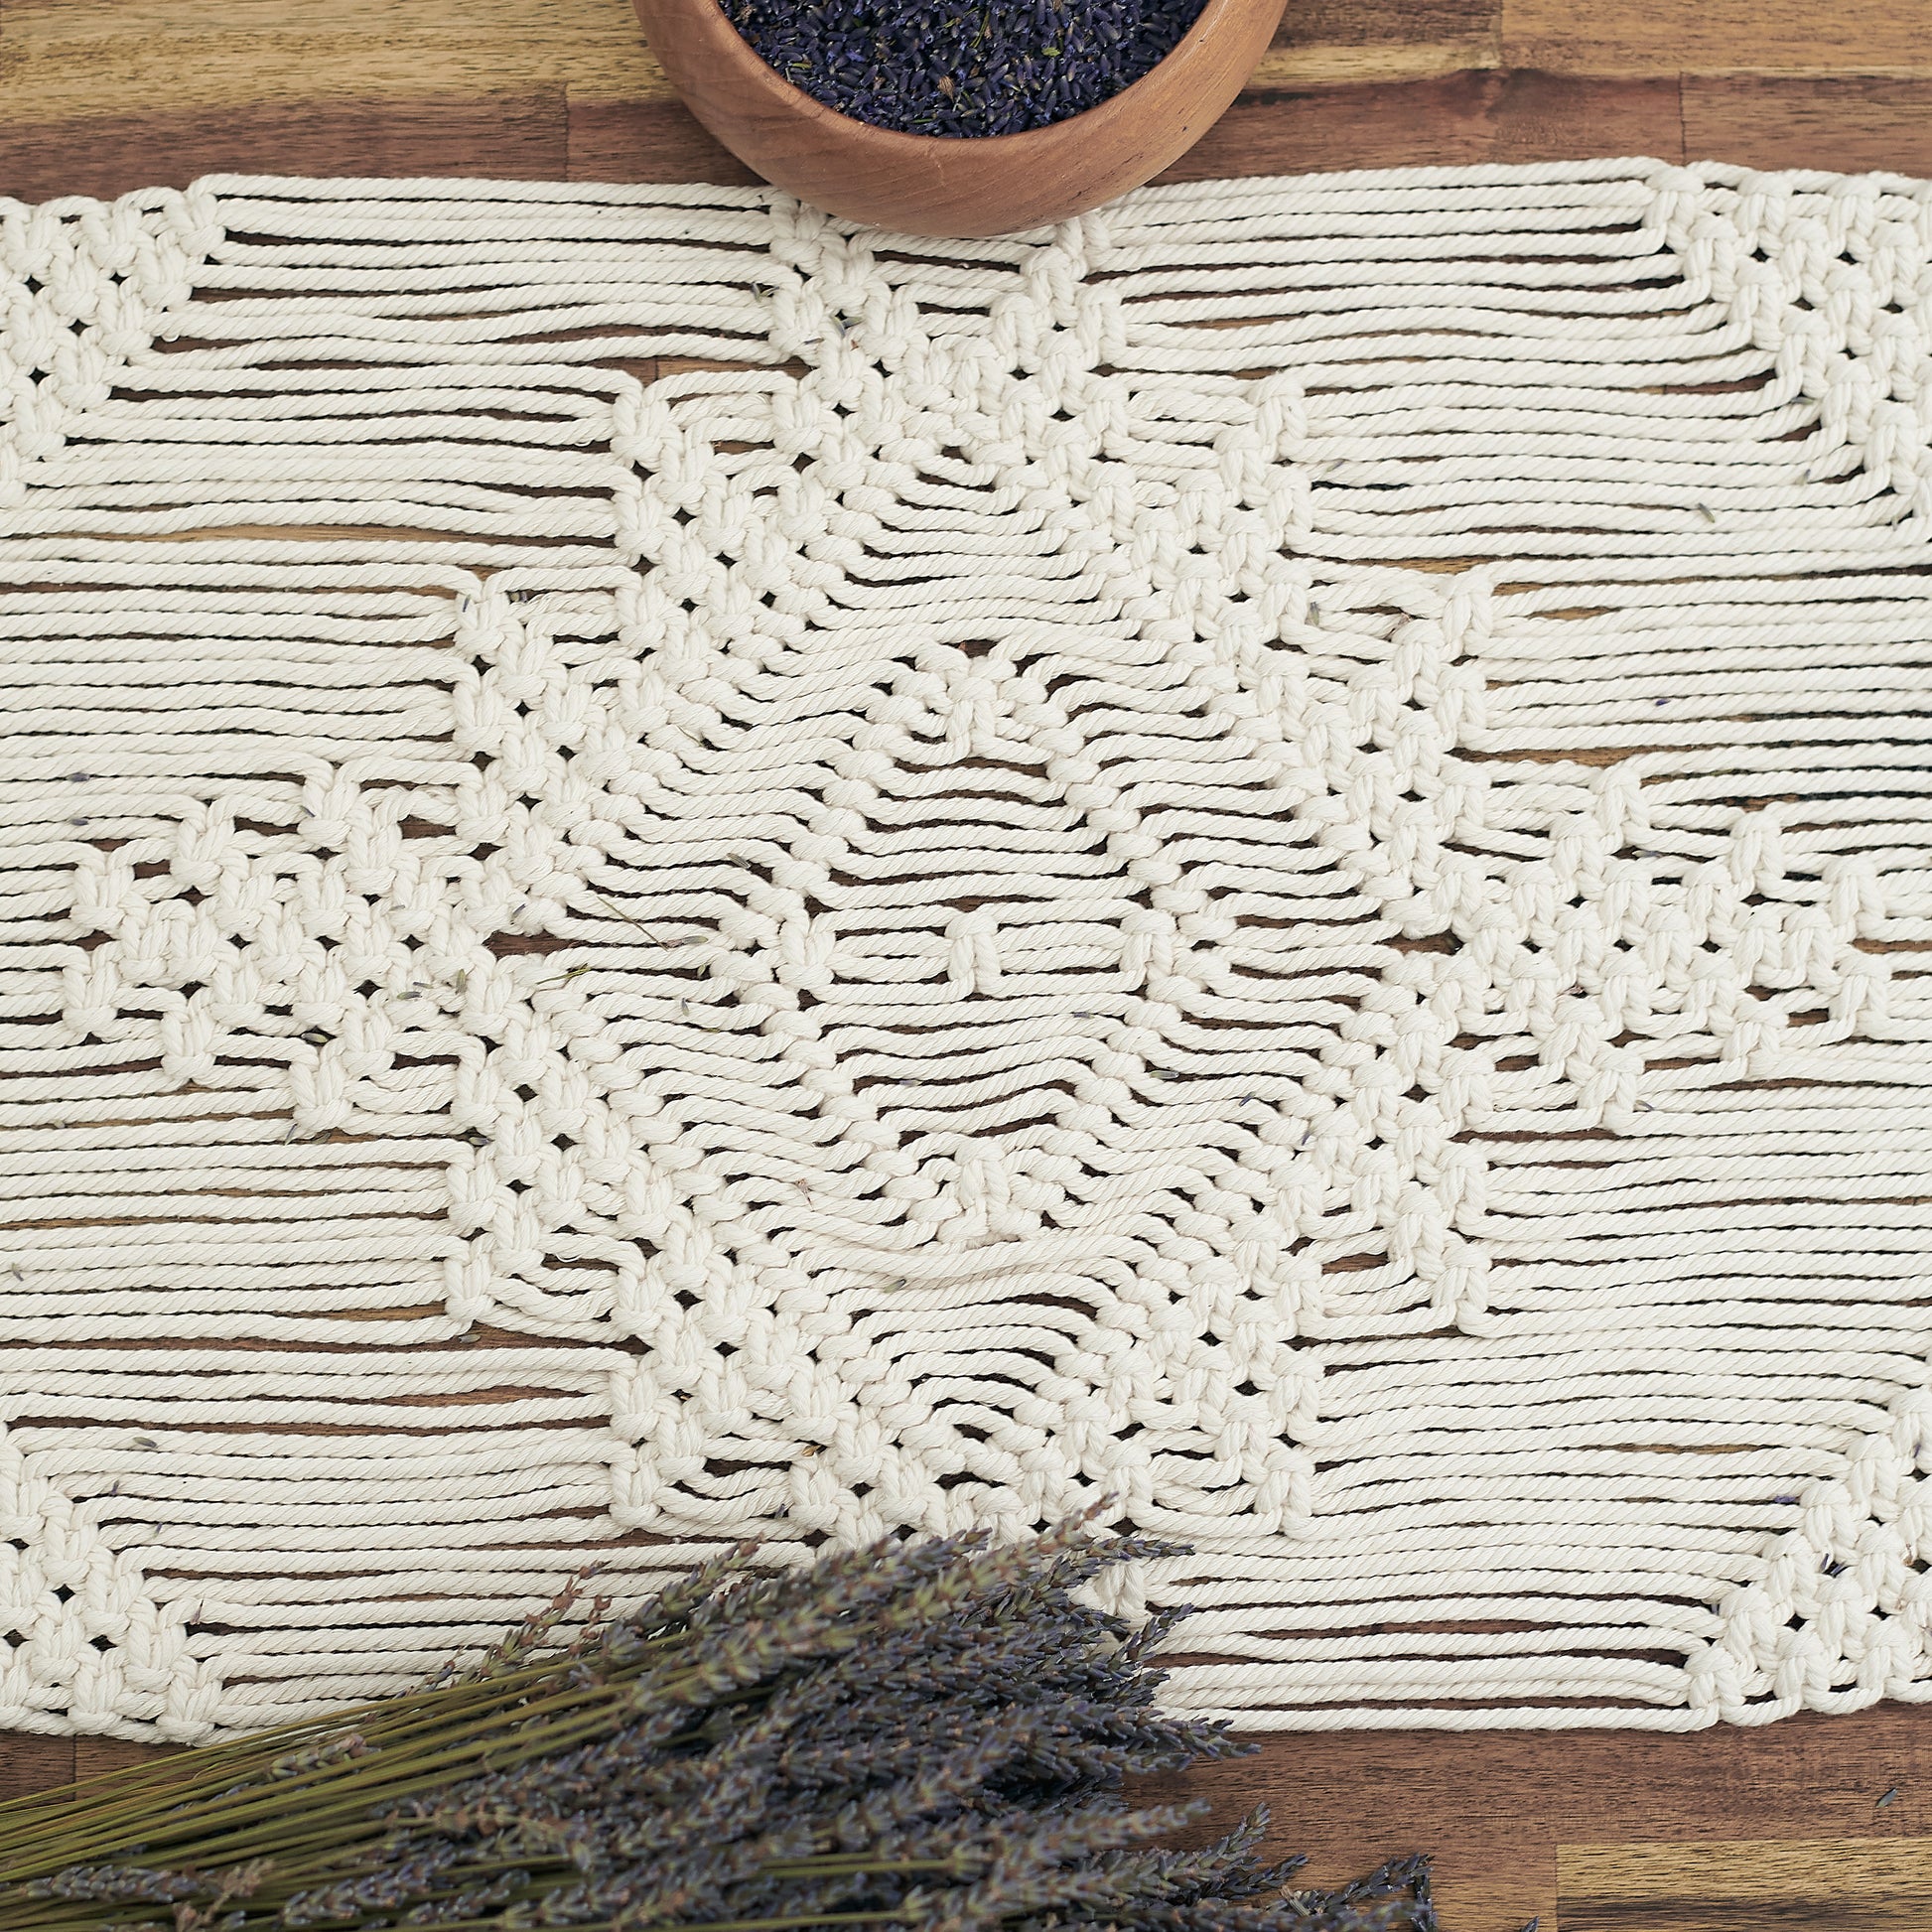 Macrame table runner on a wooden table decorated wit dried Lavendar and pottery